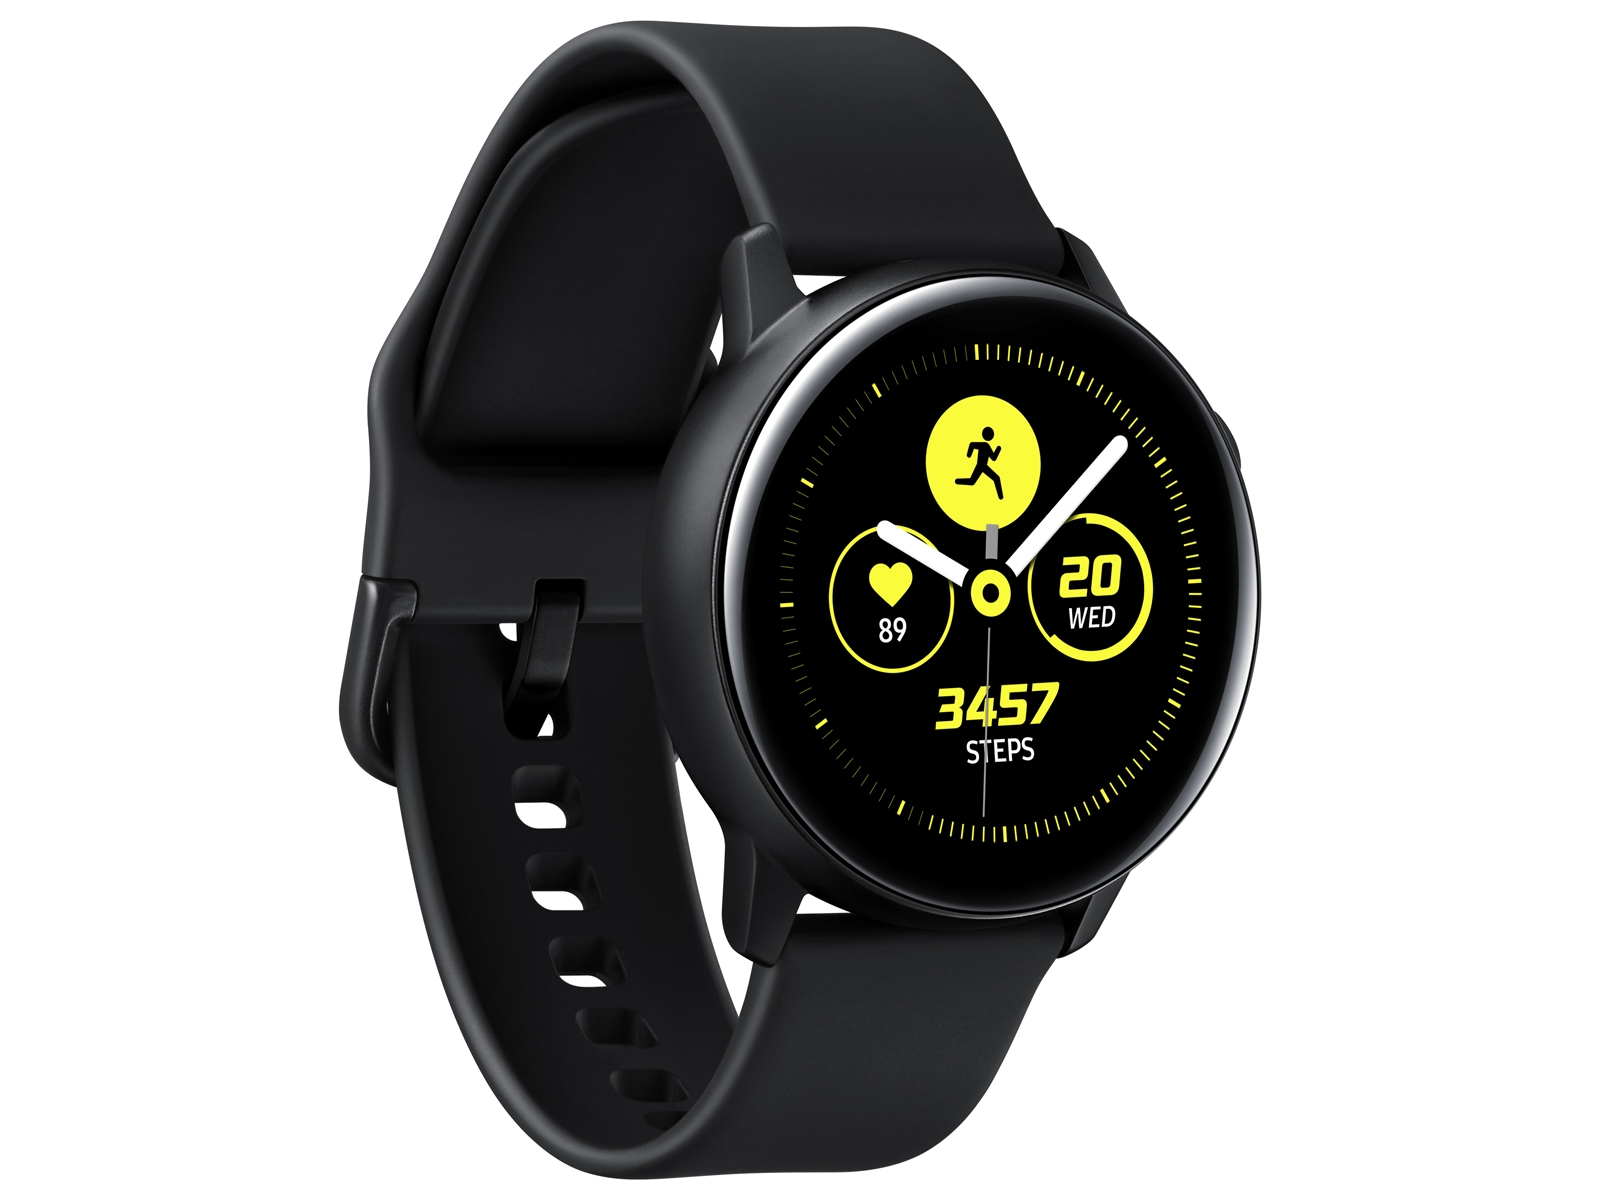 Thumbnail image of Galaxy Watch Active (40mm), Black (Bluetooth)